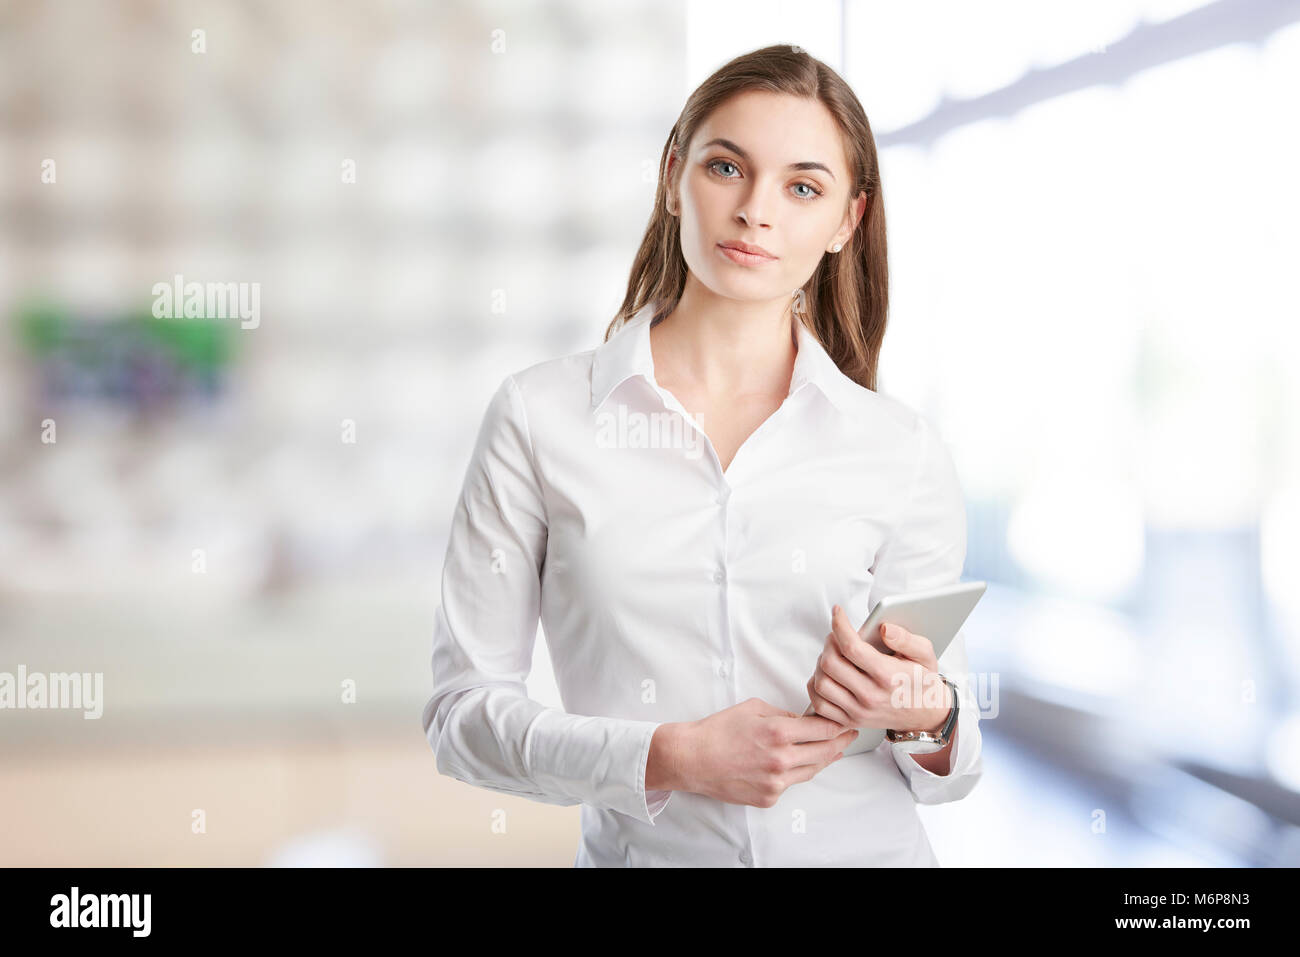 Portrait of young financial assistant businesswoman using digitla tablet while standing at the office. Stock Photo